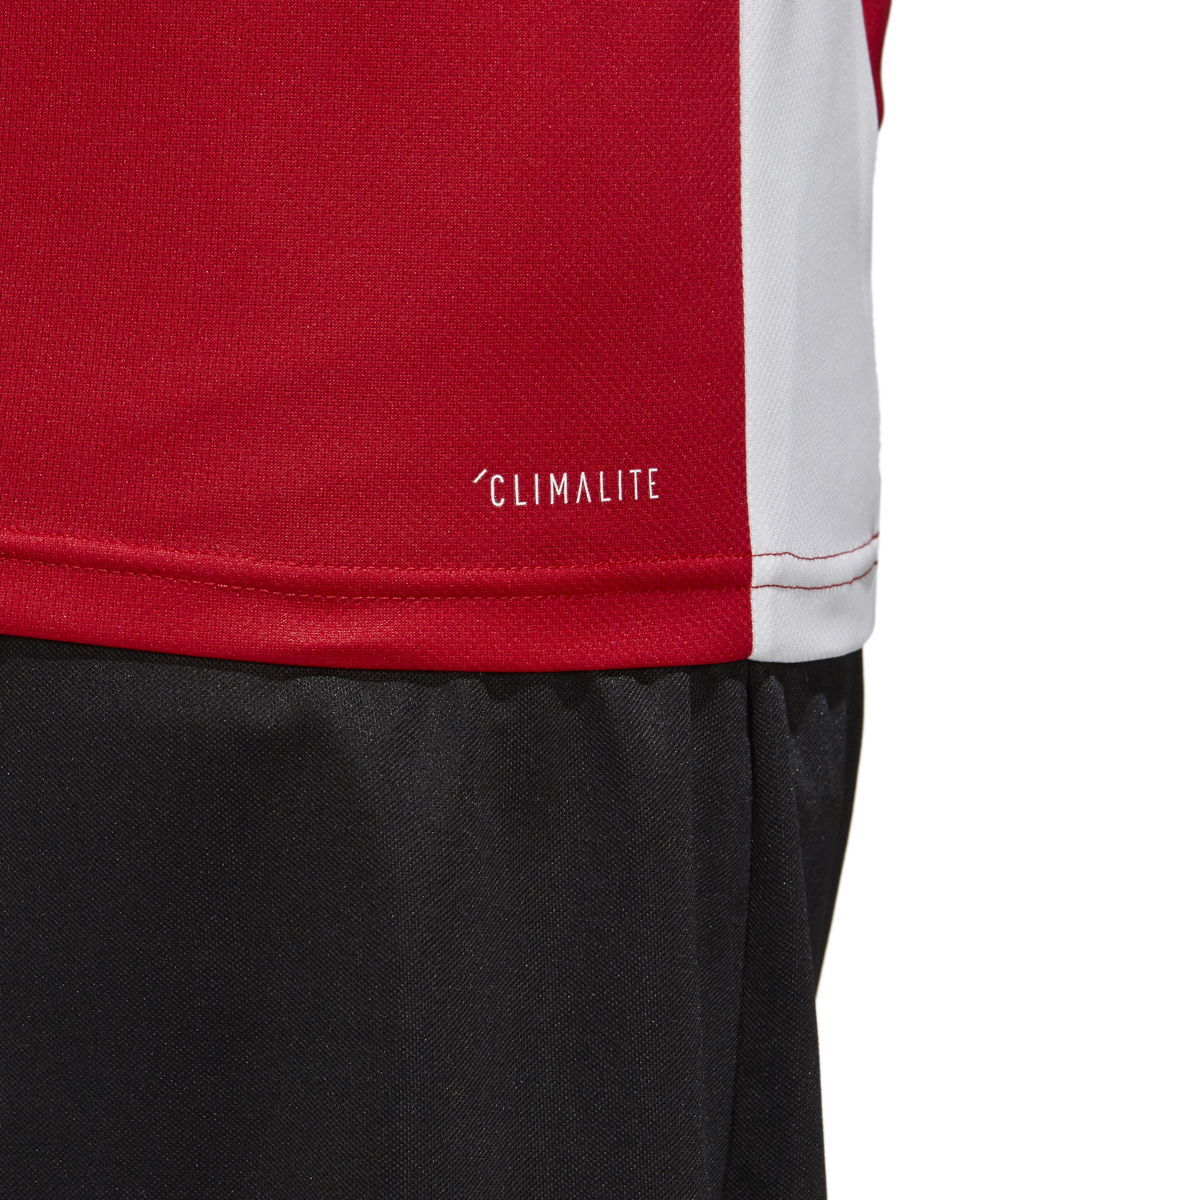 Men's Adidas Entrada 18 Soccer Jersey Red/White - XS - image 5 of 6